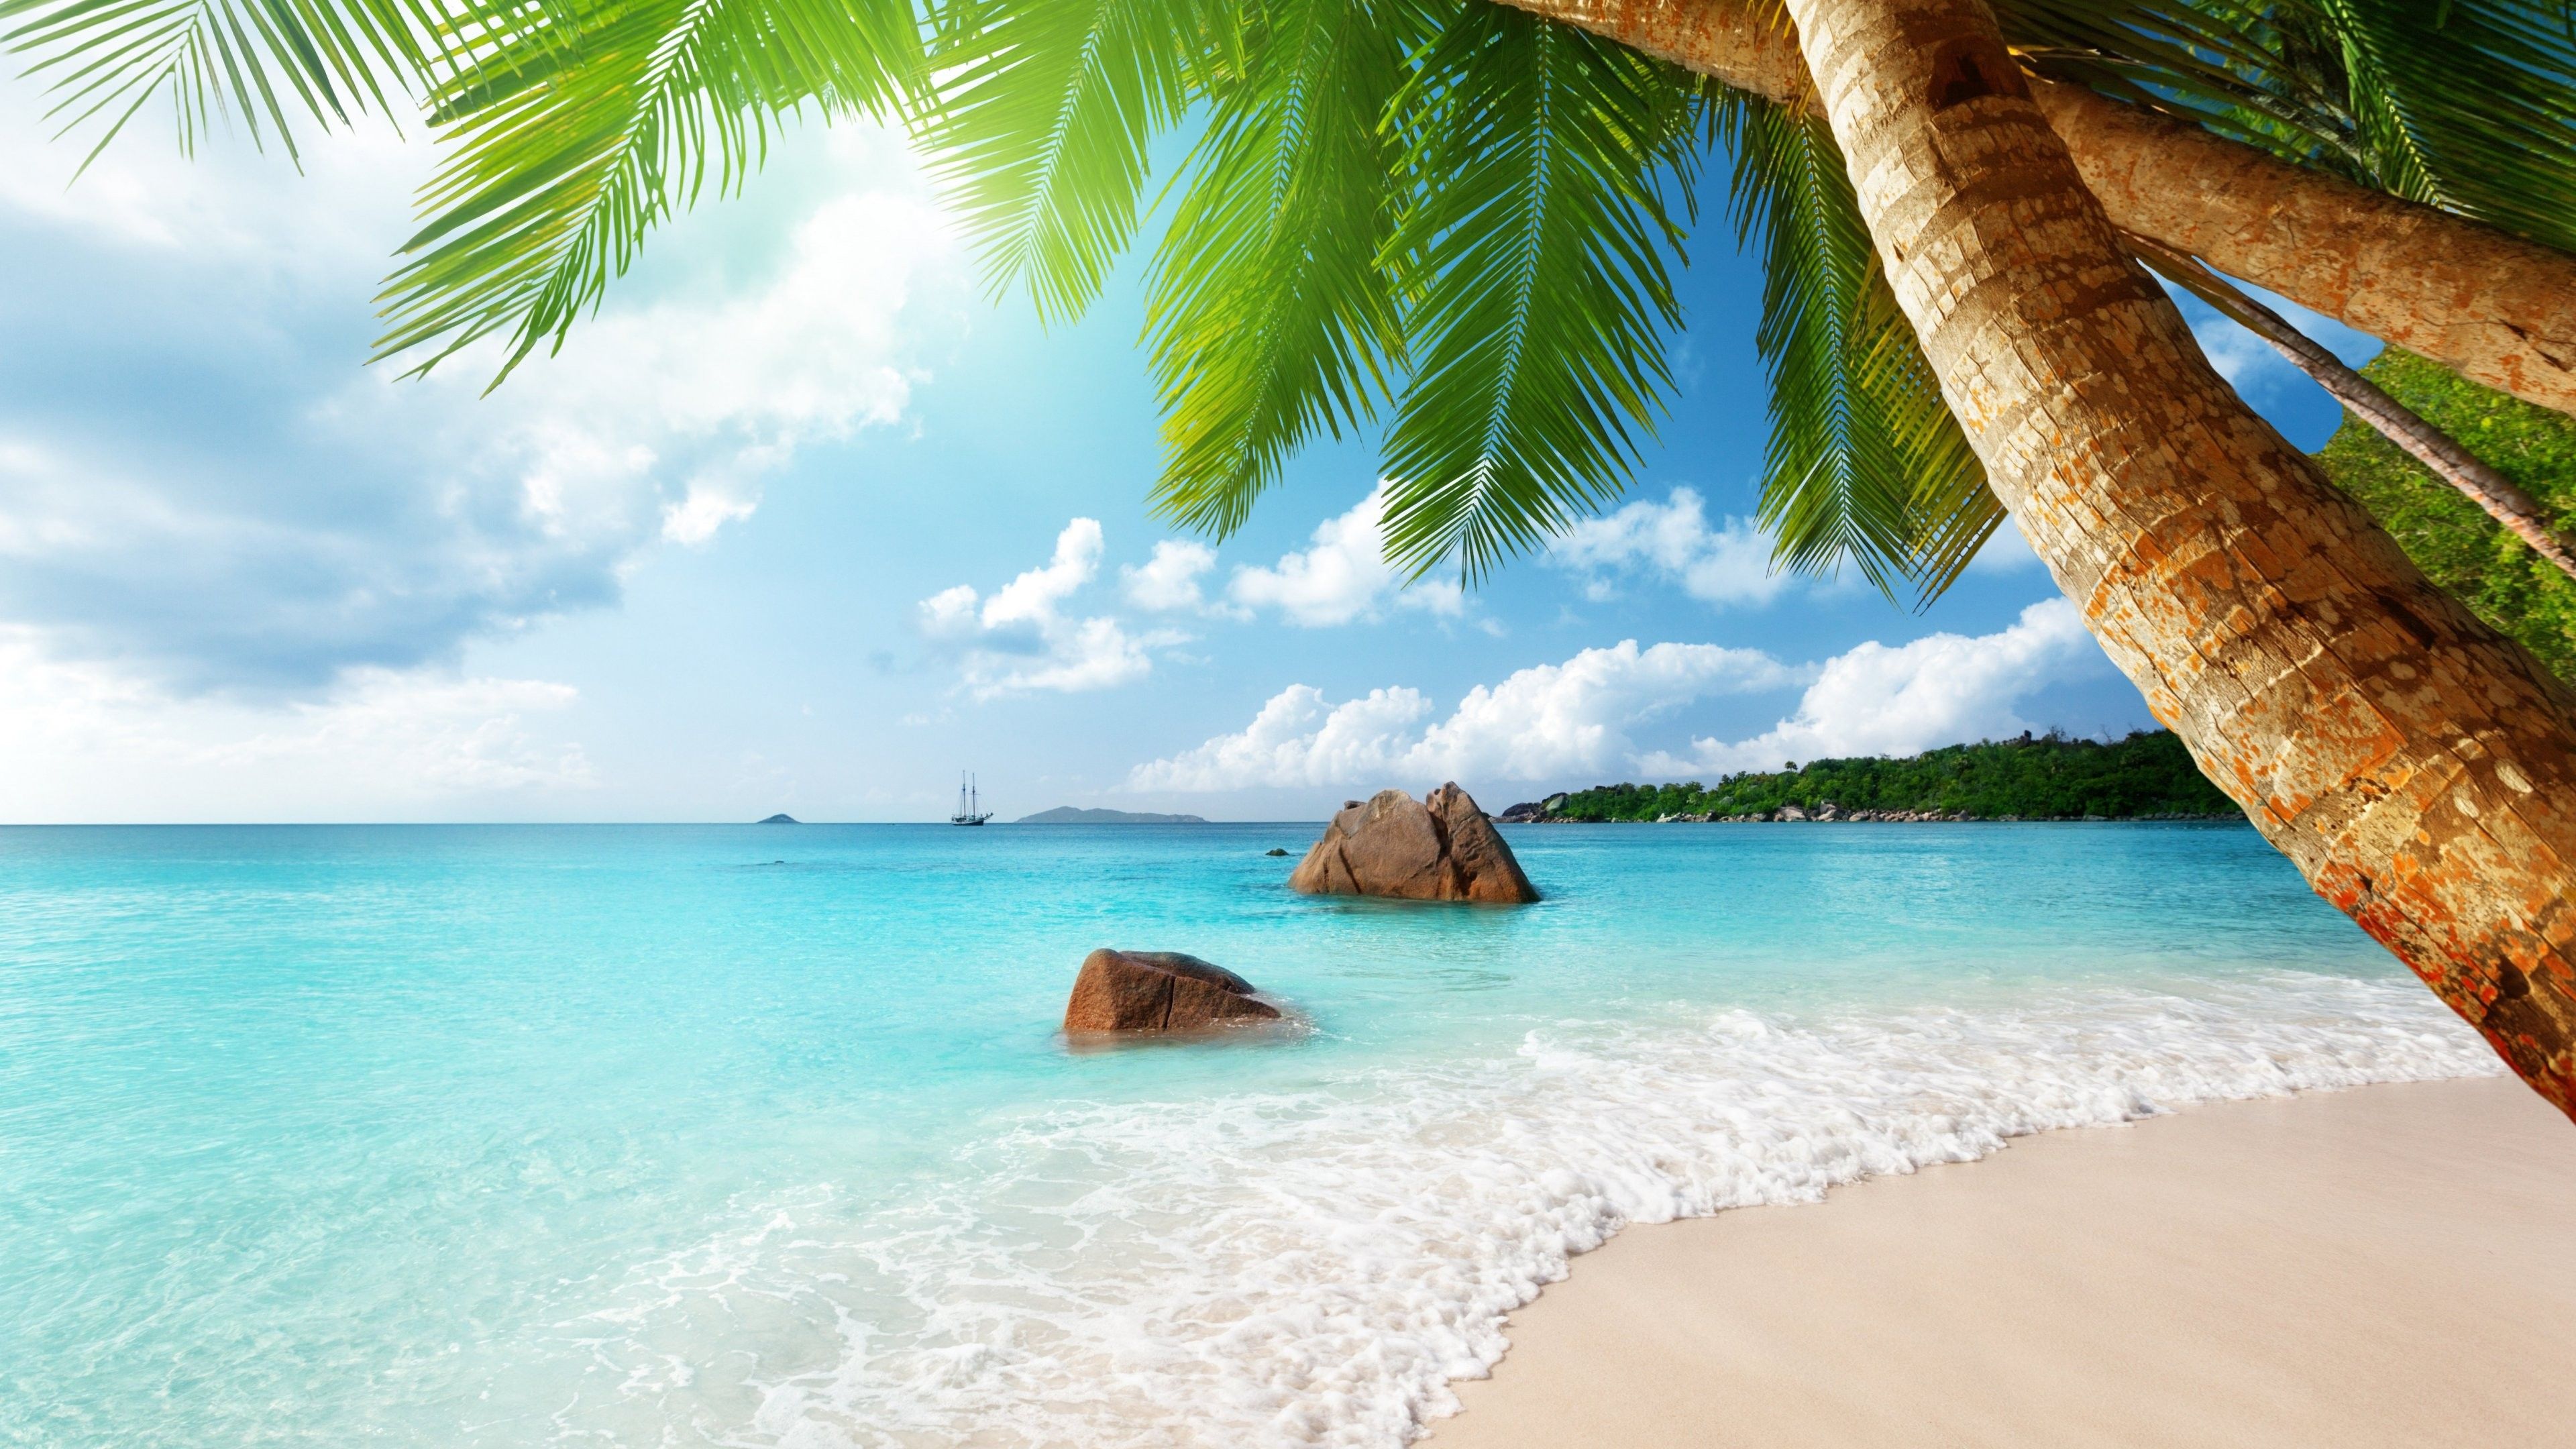 HD Wallpapers for theme: palm. ocean